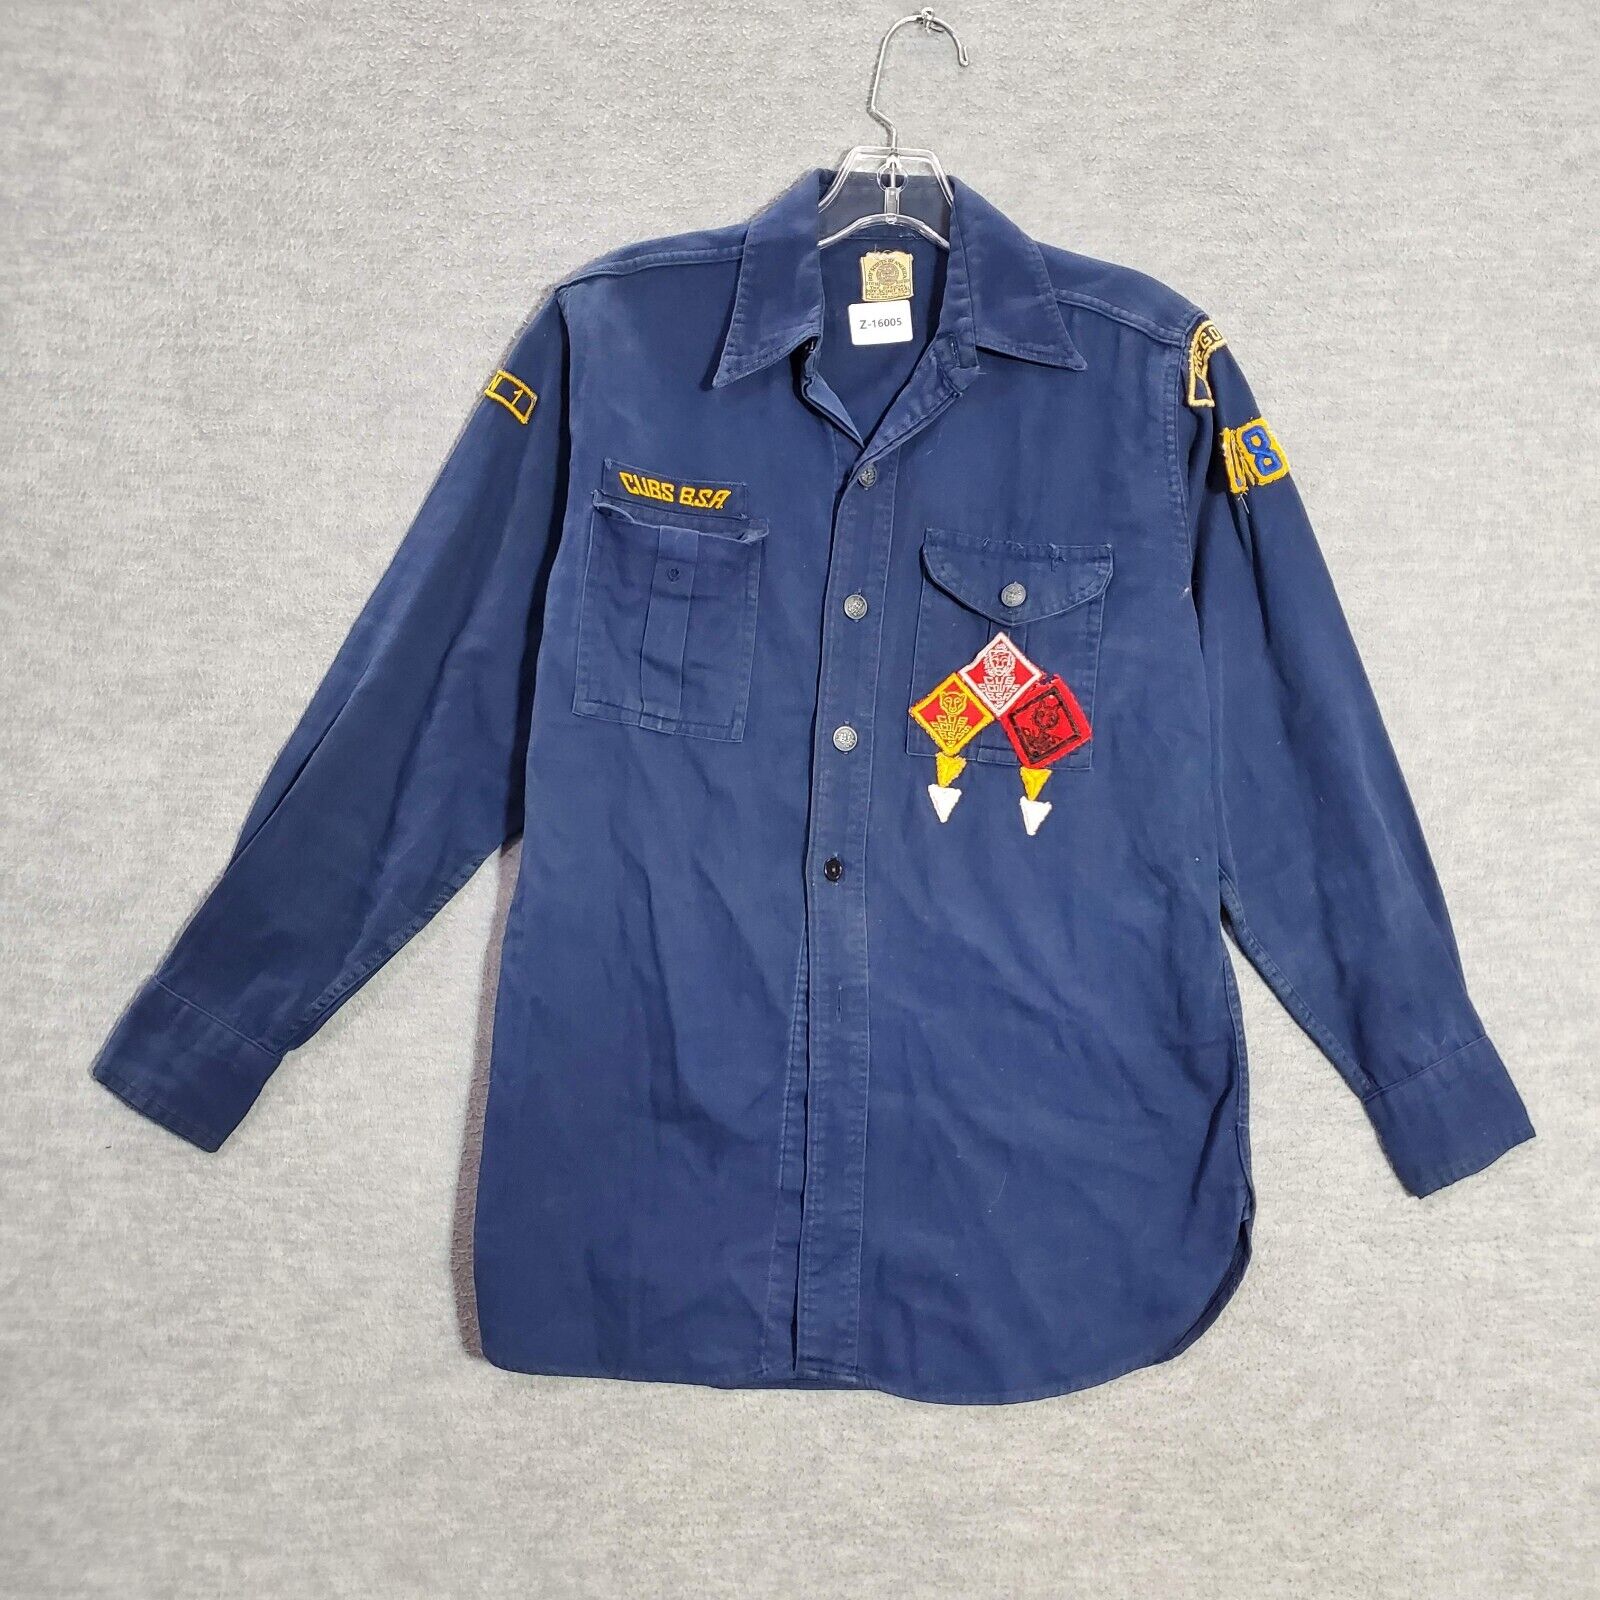 Boy Scouts of America Boys Shirt Large  Blue Long Sleeve Patches Button Up